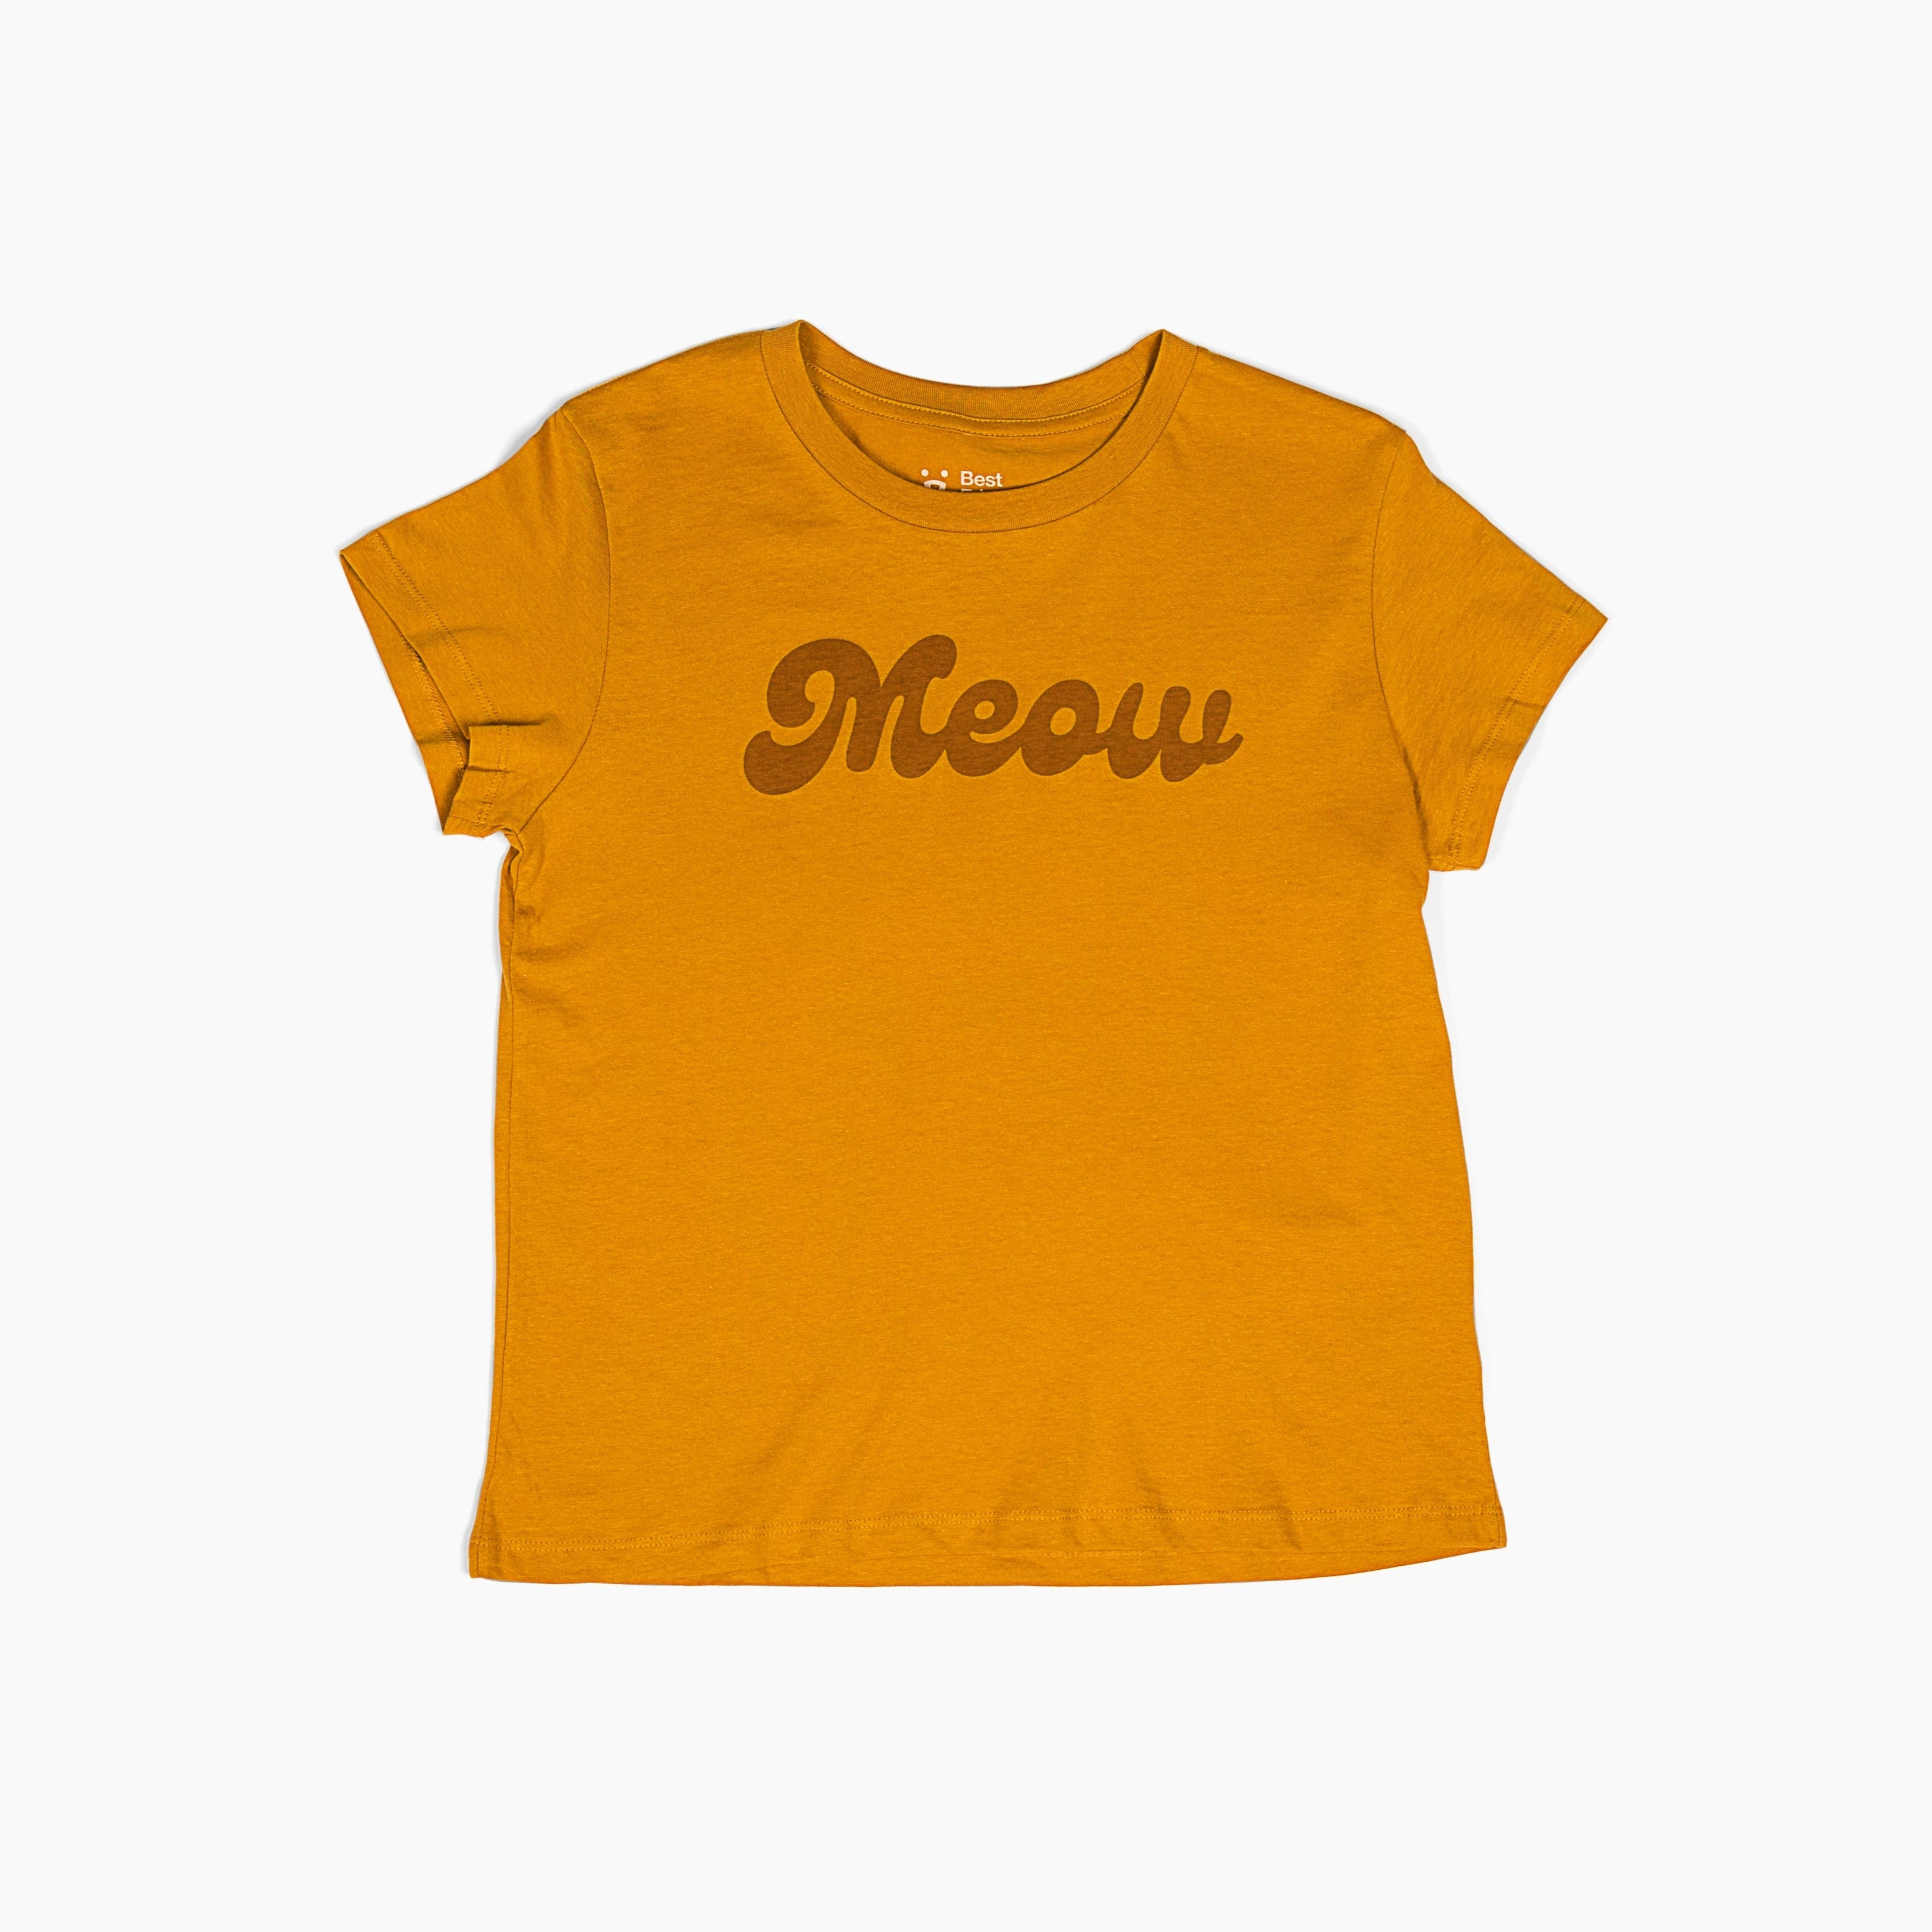 All Meow T-Shirt